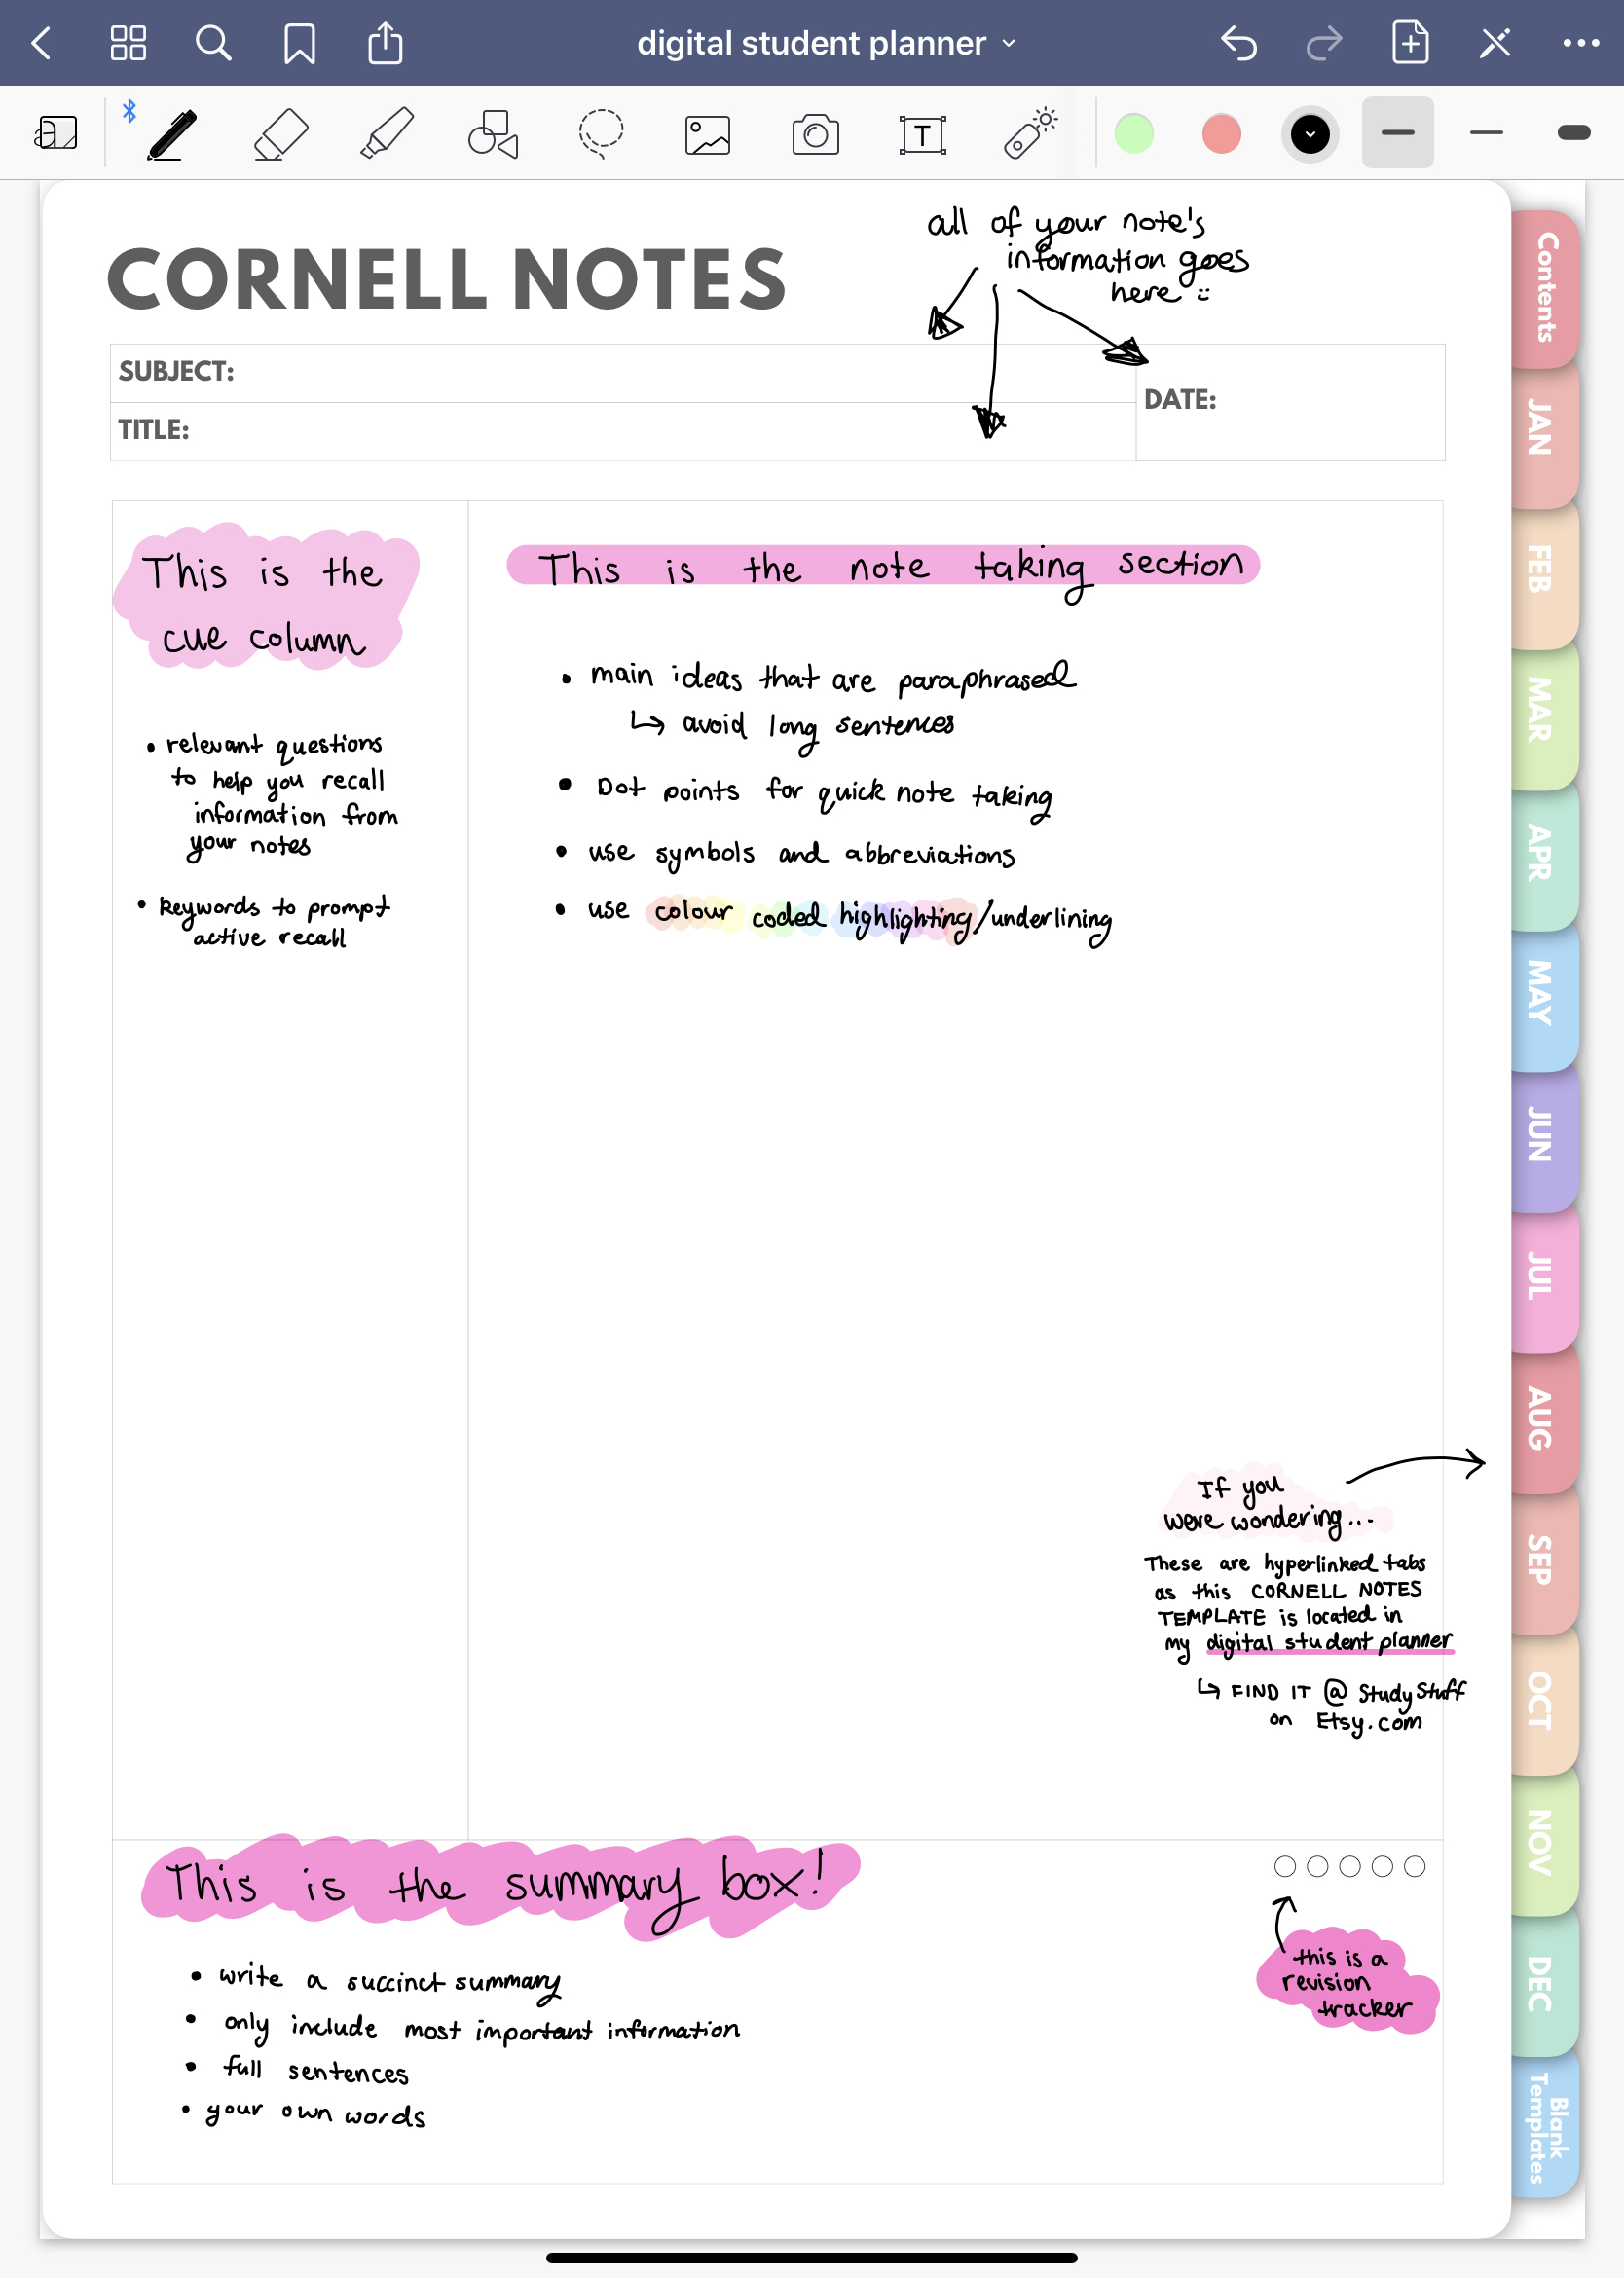 calendars-planners-paper-goodnotes-cornell-note-taking-instant